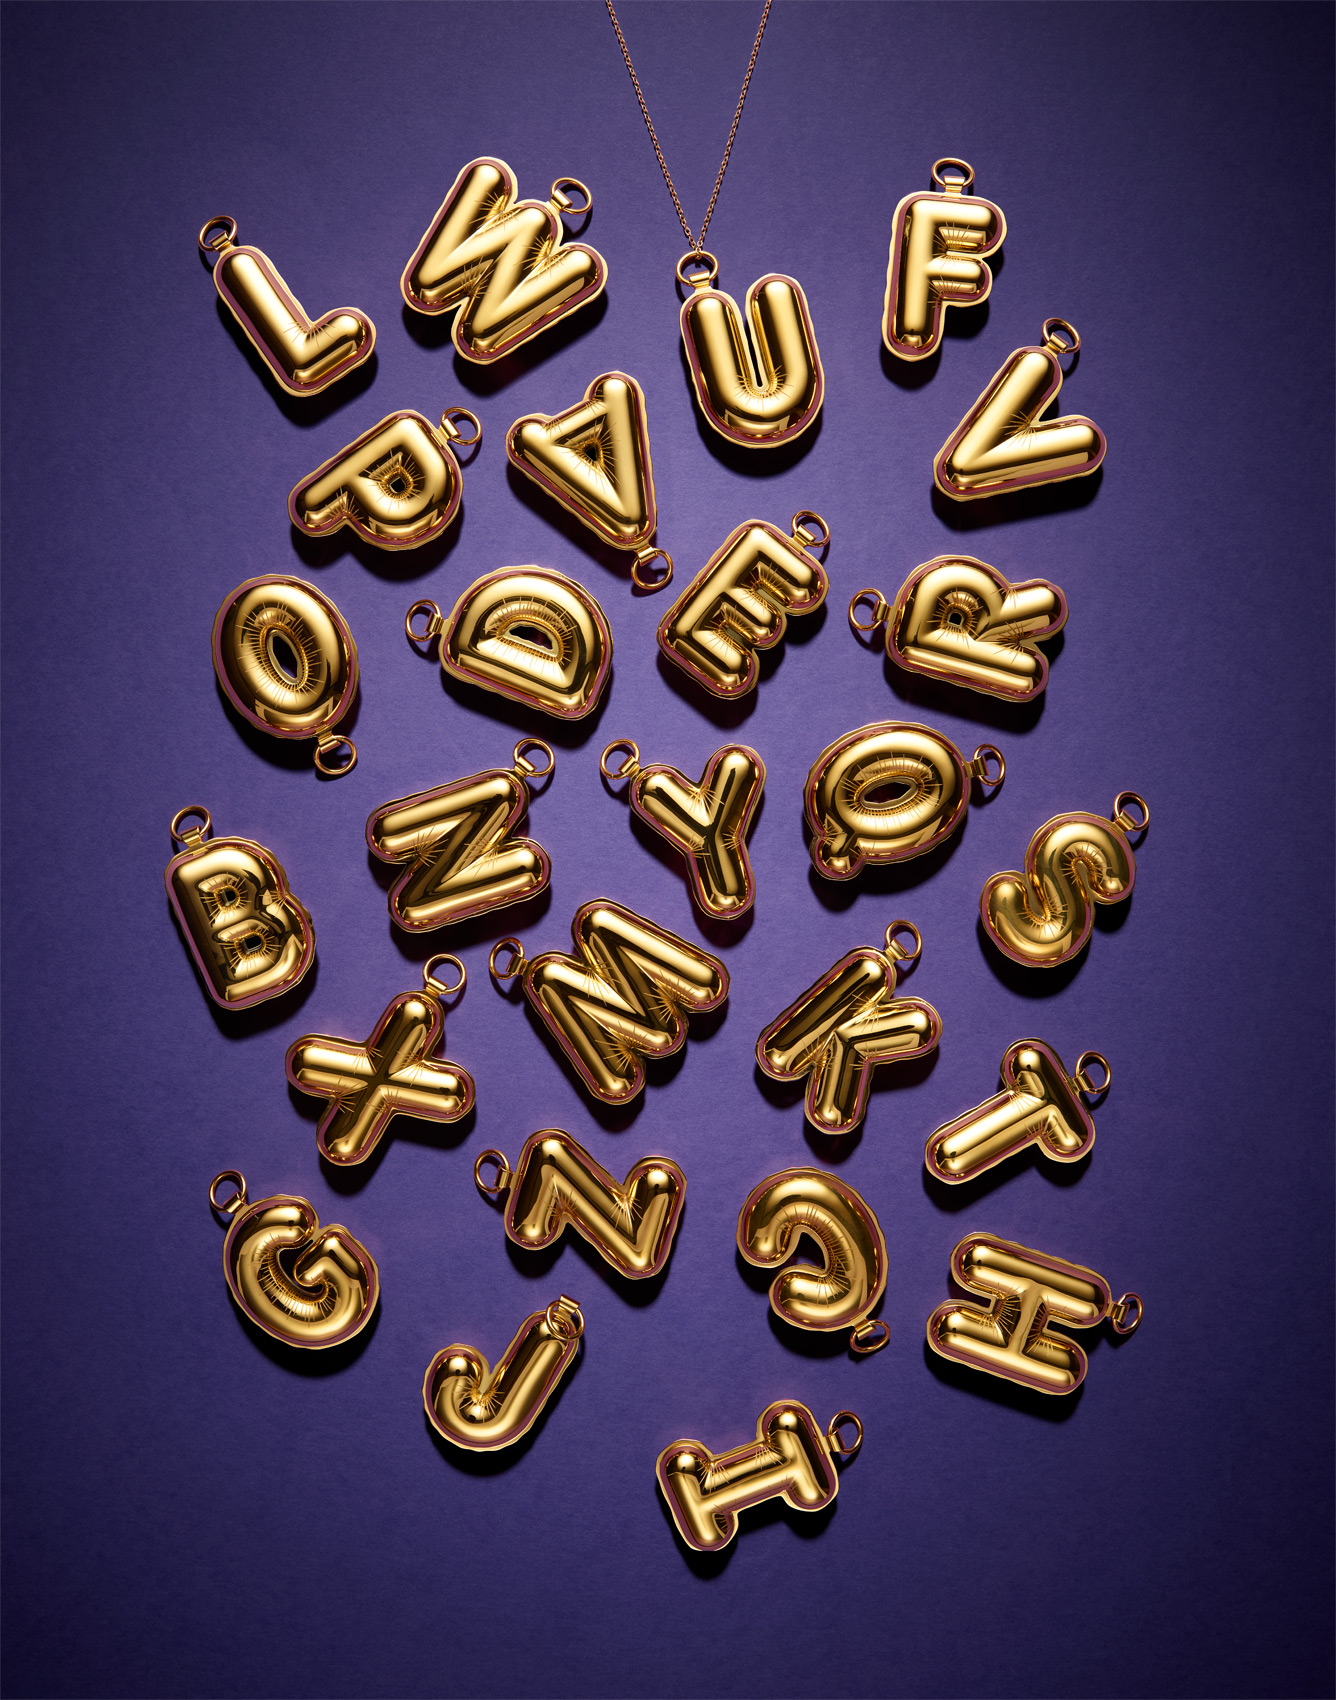 Bubble letters by Alexander Kent London based still life and product photographer.